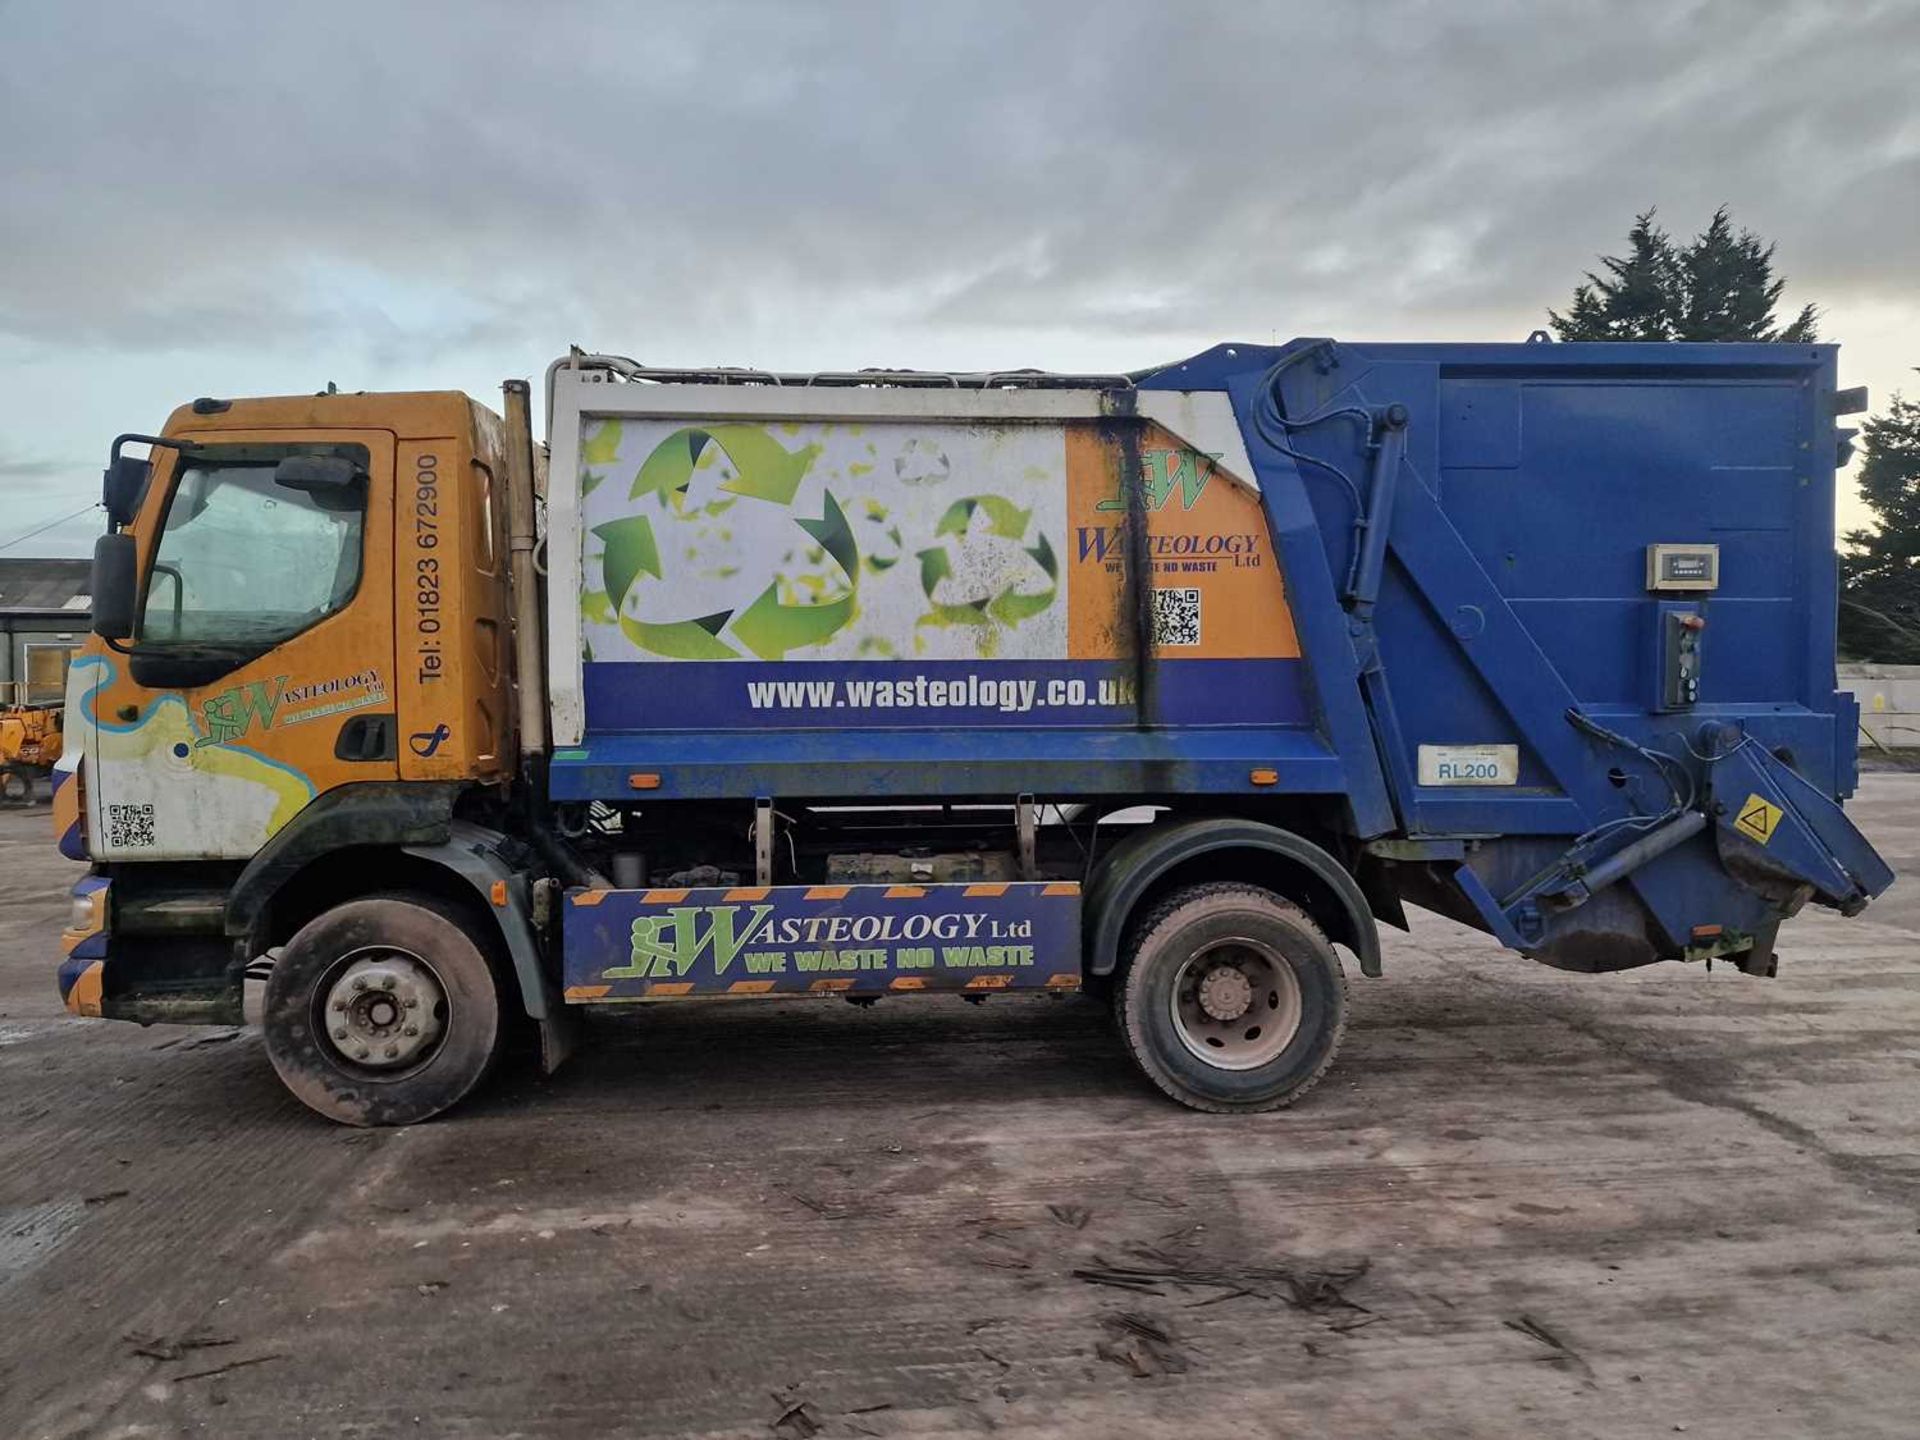 DAF LF55.220 4x2 Refuse Collection Lorry, 3 Way Camera, Automatic Gear Box - Image 2 of 21